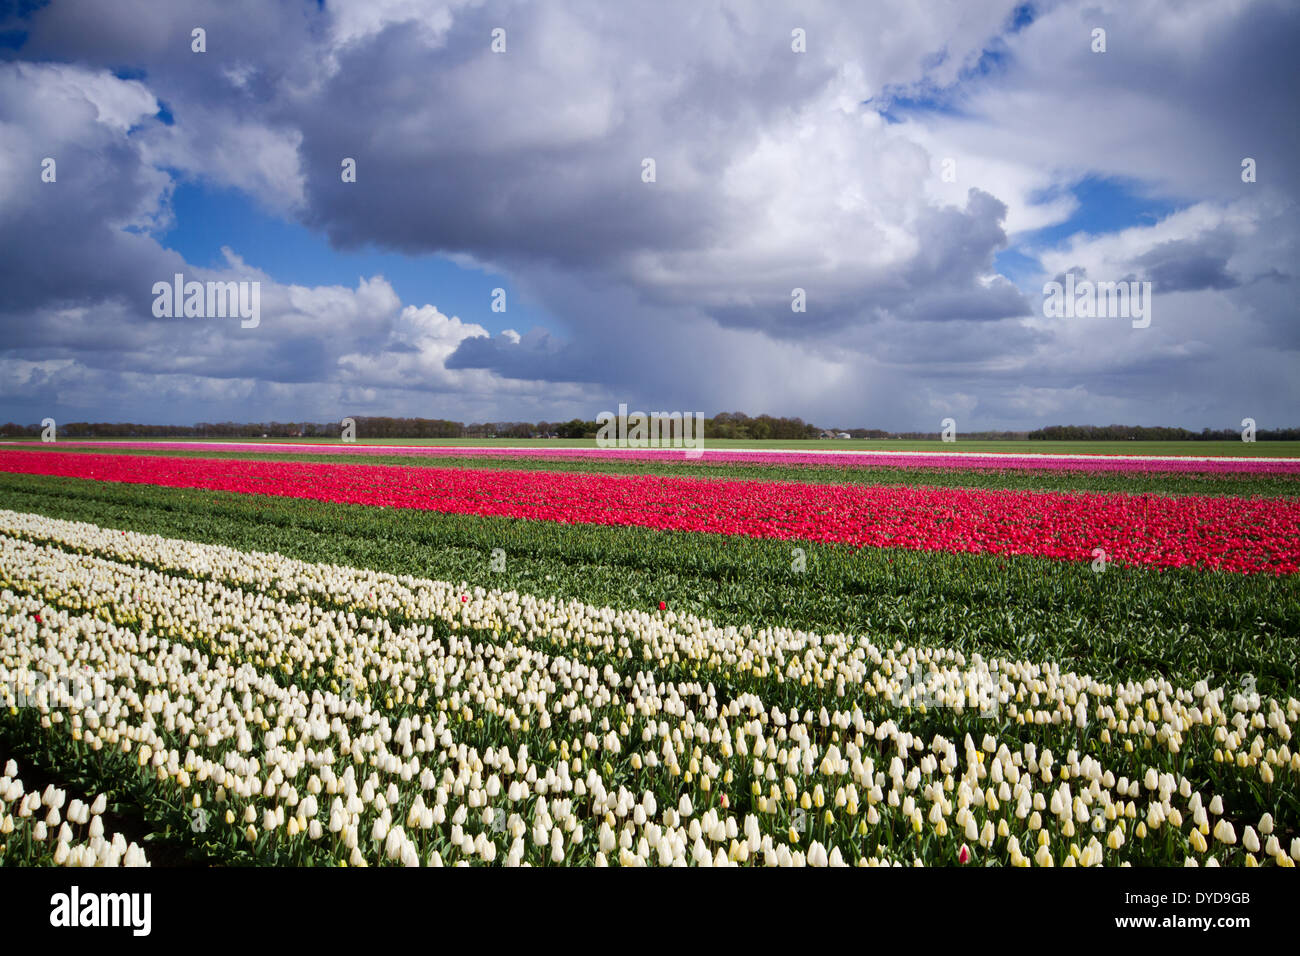 White and red Tulips in rows under dark clouds Stock Photo